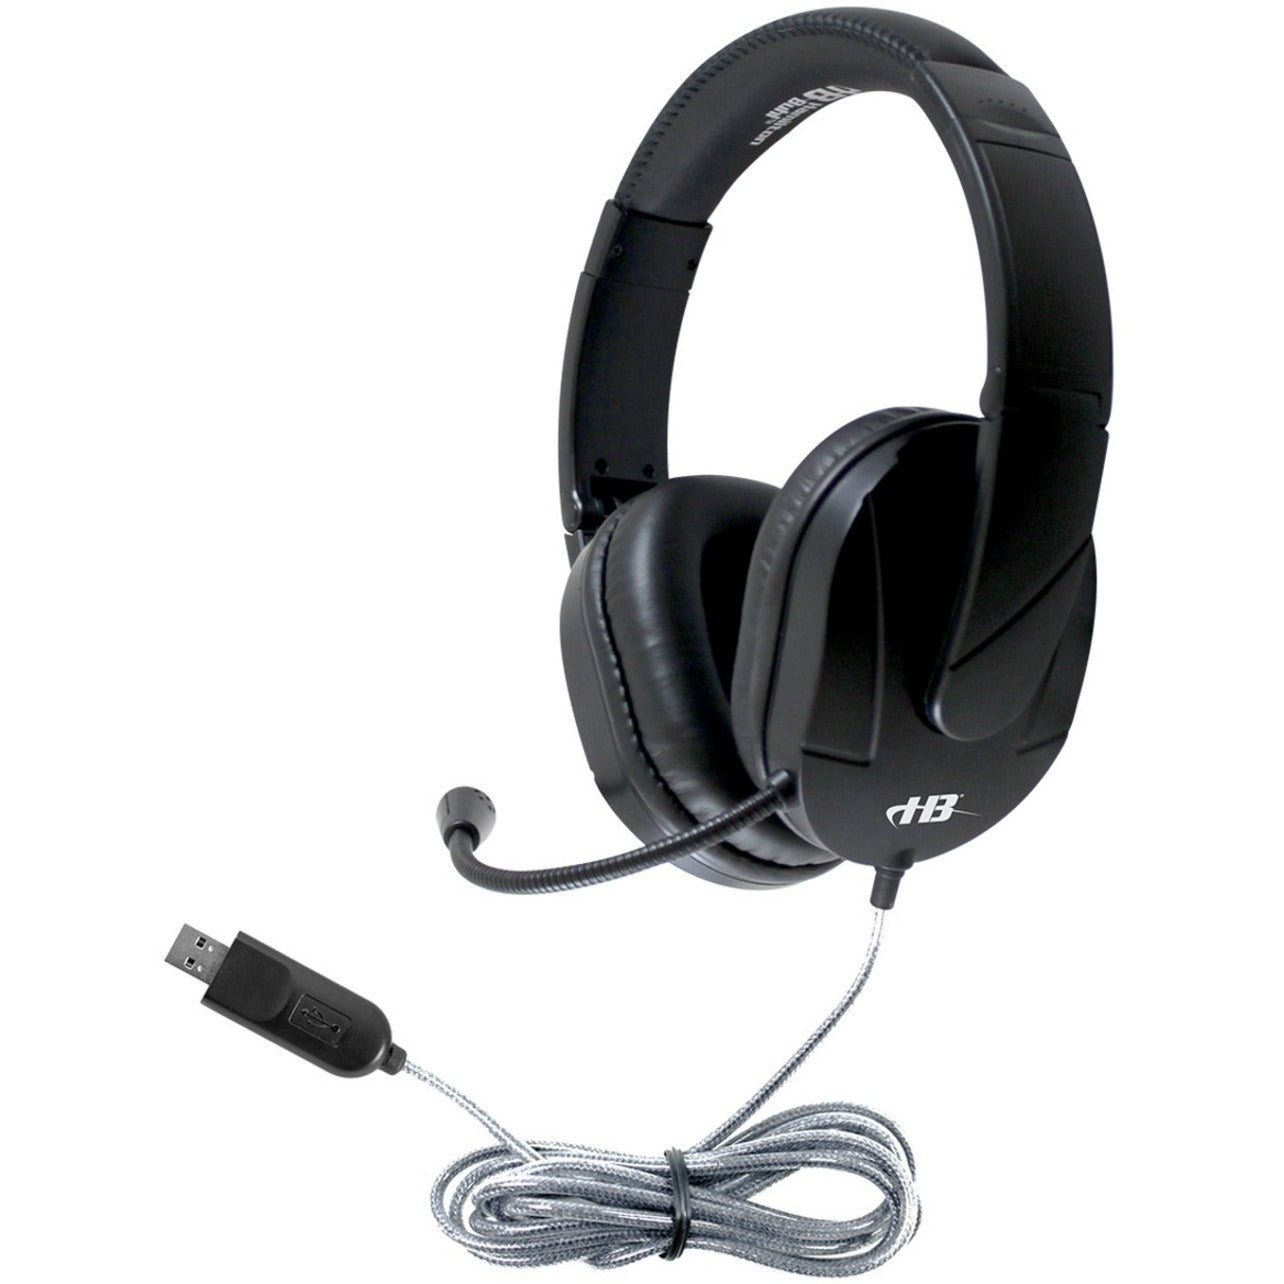 Hamilton Buhl M2USB MACH-2 Deluxe-Sized Multimedia Headset With Steel-Reinforced Gooseneck Mic, Over-the-head USB Headset for Classroom